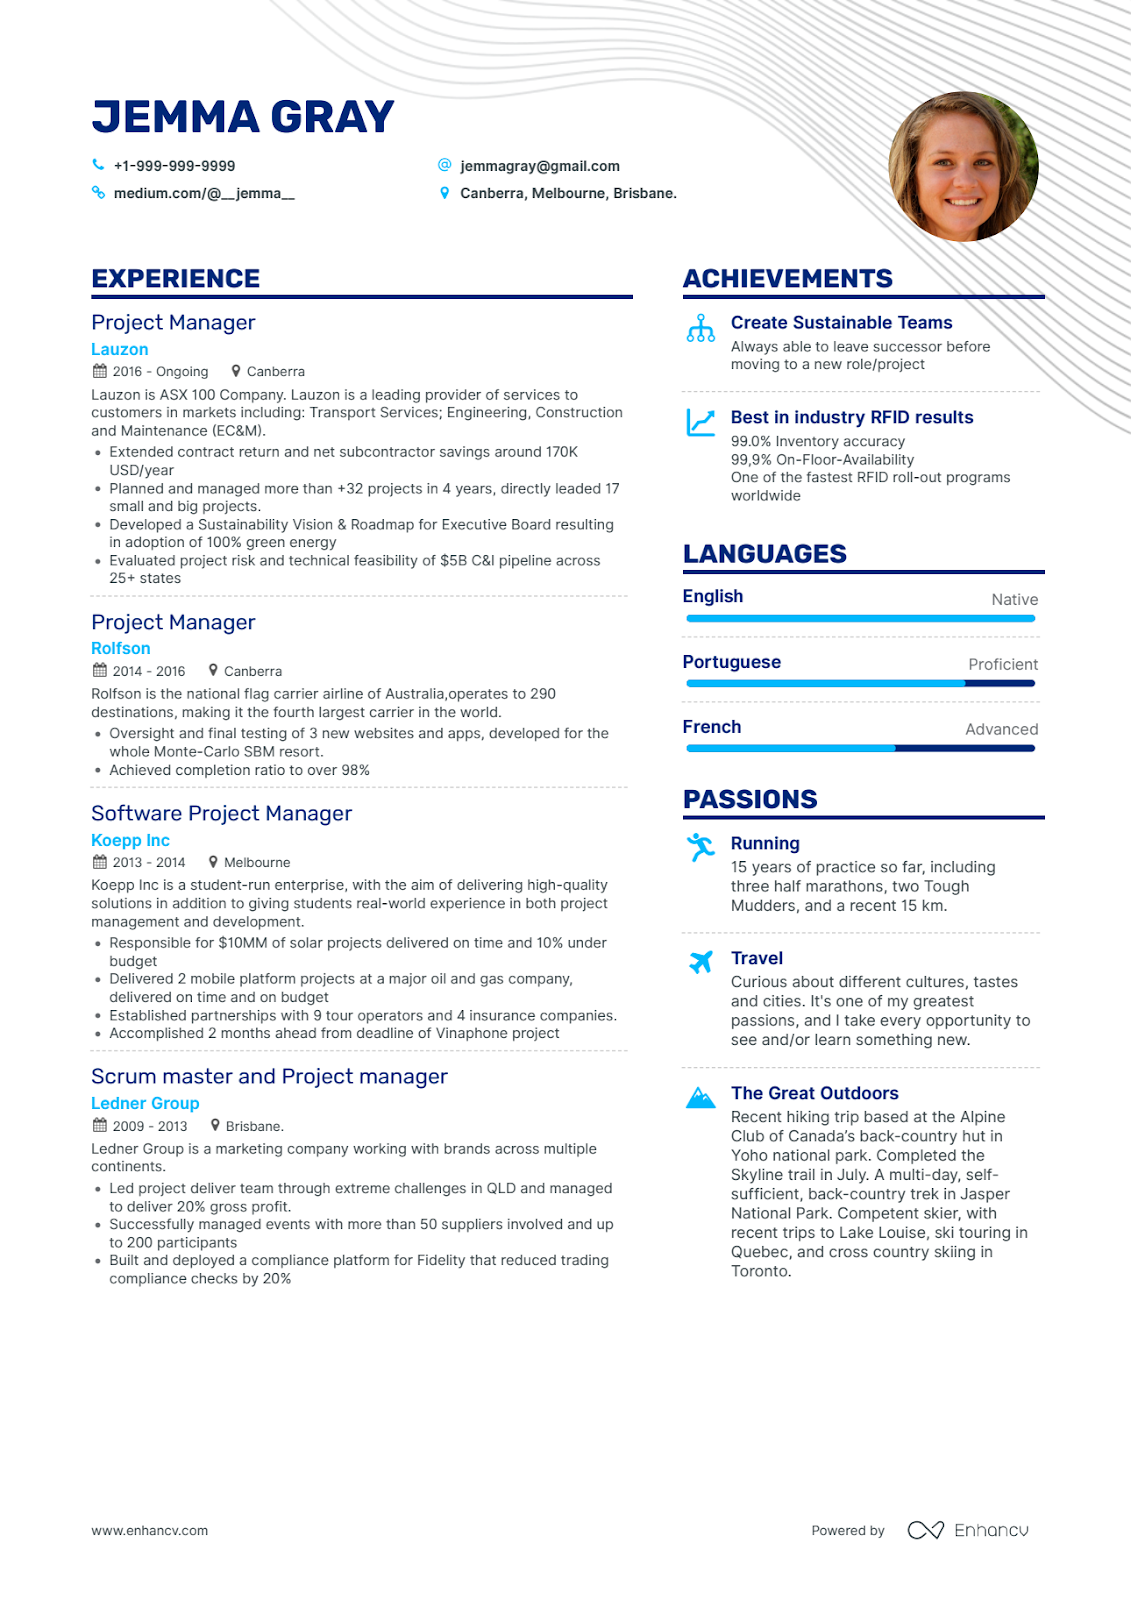 Enhancv Does Having Color on My Resume Affect My Chance of Getting Hired? Color on resume